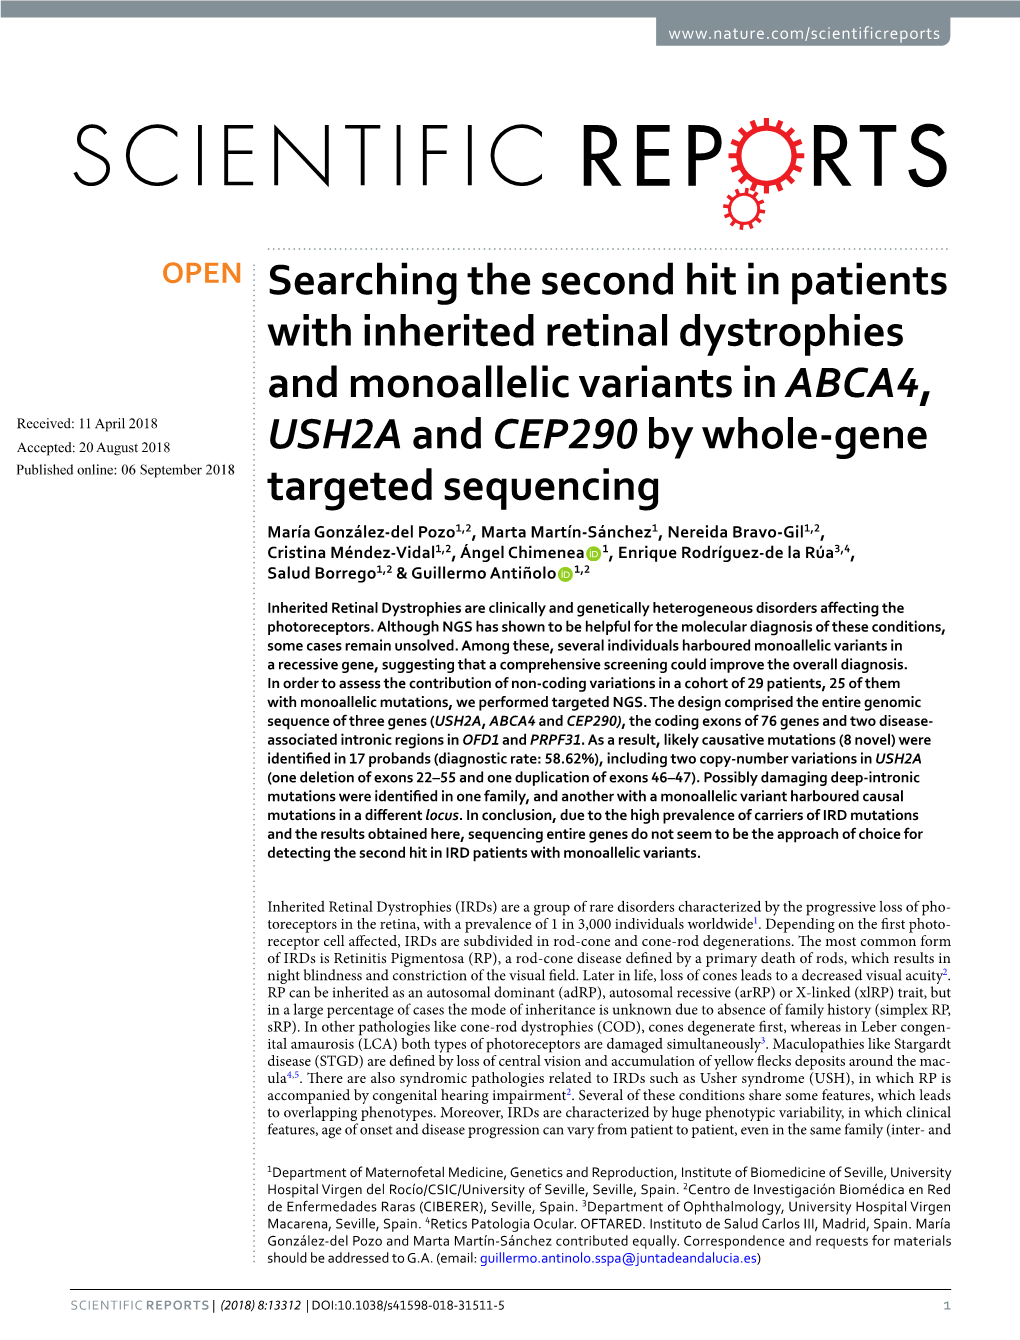 Searching the Second Hit in Patients with Inherited Retinal Dystrophies and Monoallelic Variants in ABCA4, USH2A and CEP290 by W